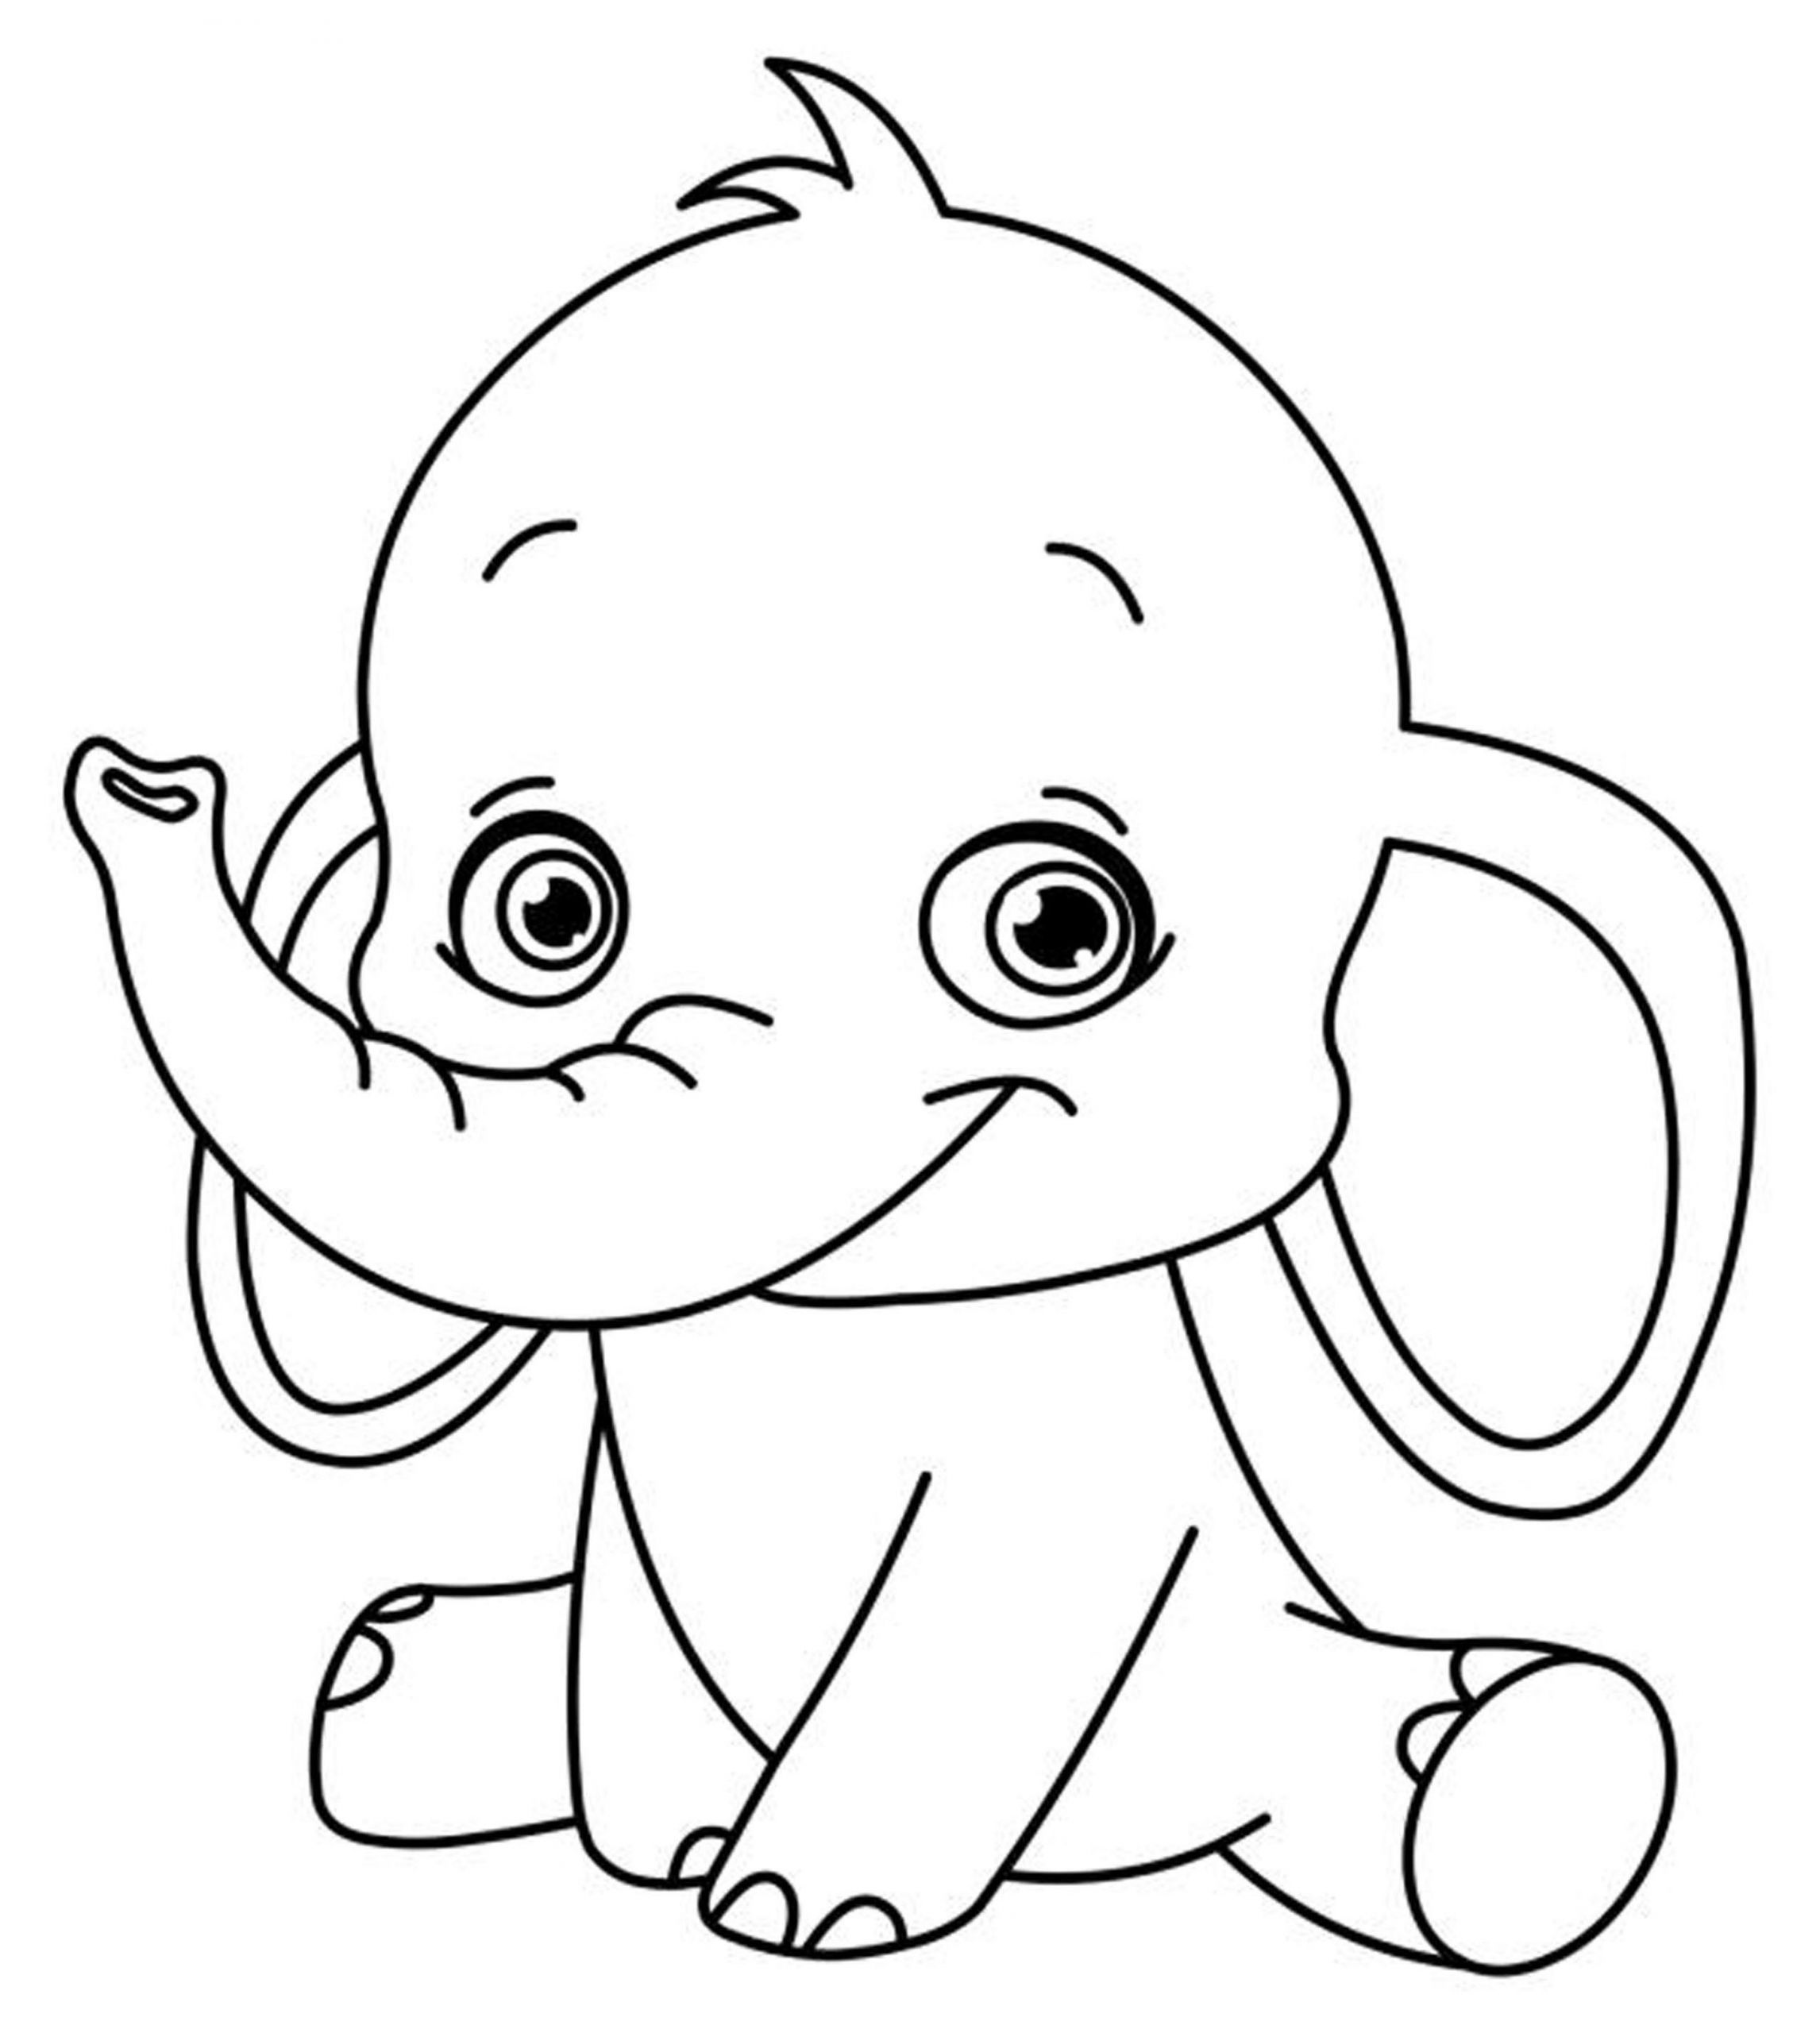 Cute Baby Elephant Coloring Pages
 Easy Coloring Pages coloring pages